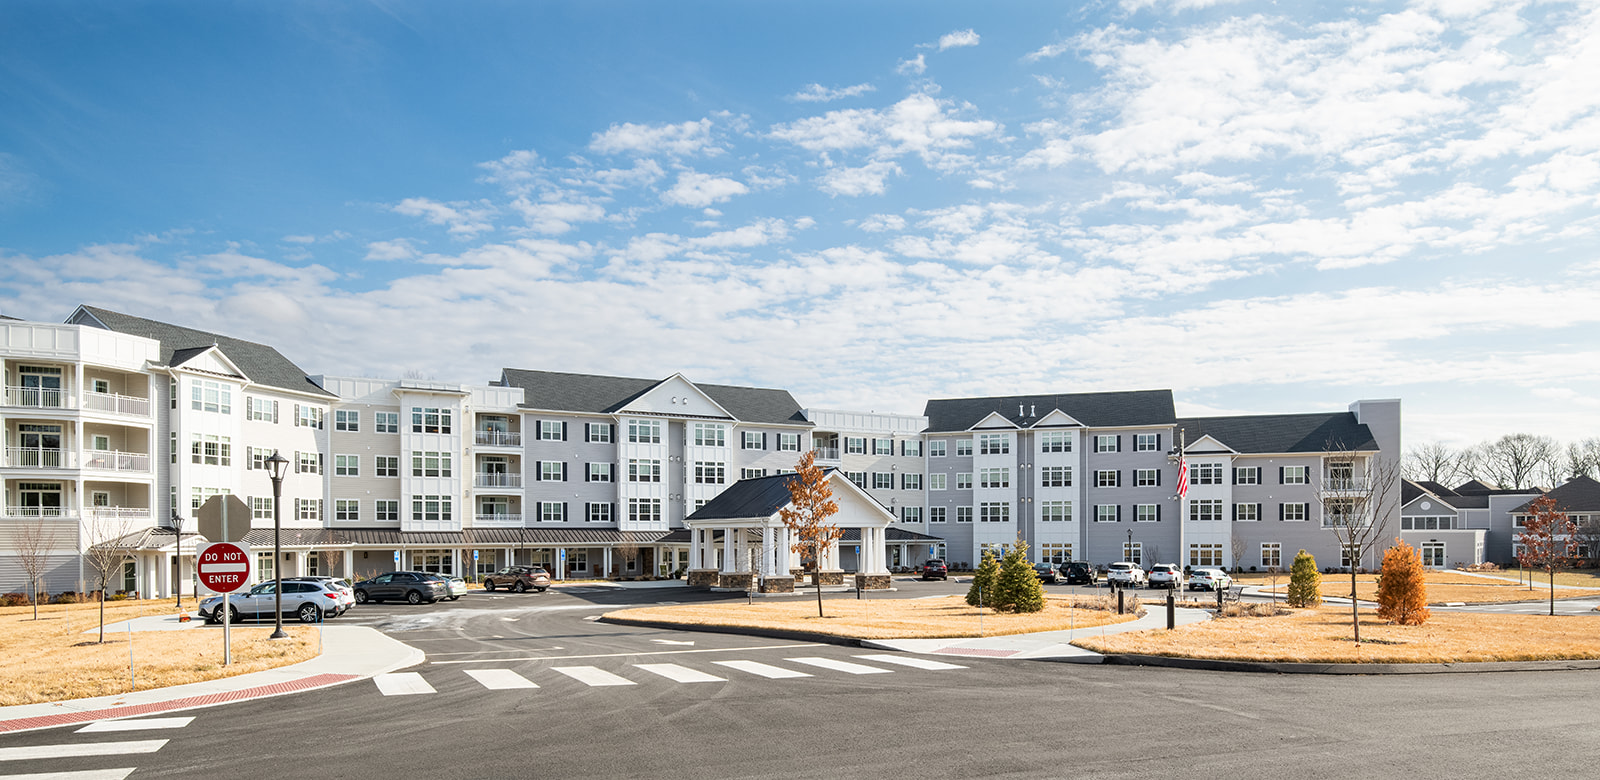 Senior Living Construction Trends Impacting Owners and Developers